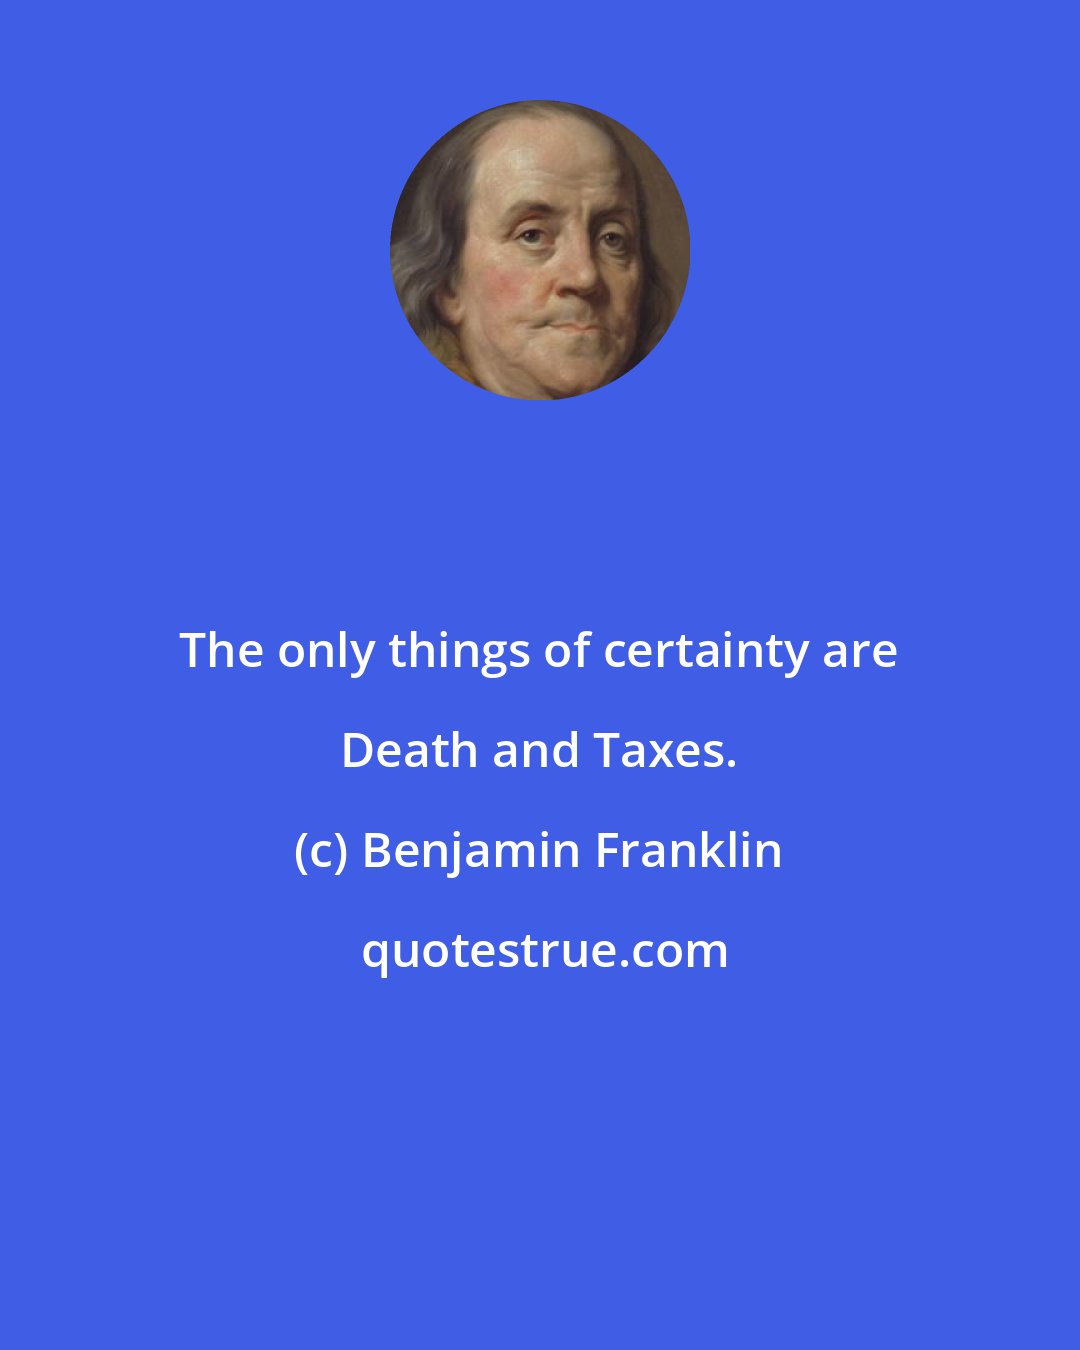 Benjamin Franklin: The only things of certainty are Death and Taxes.